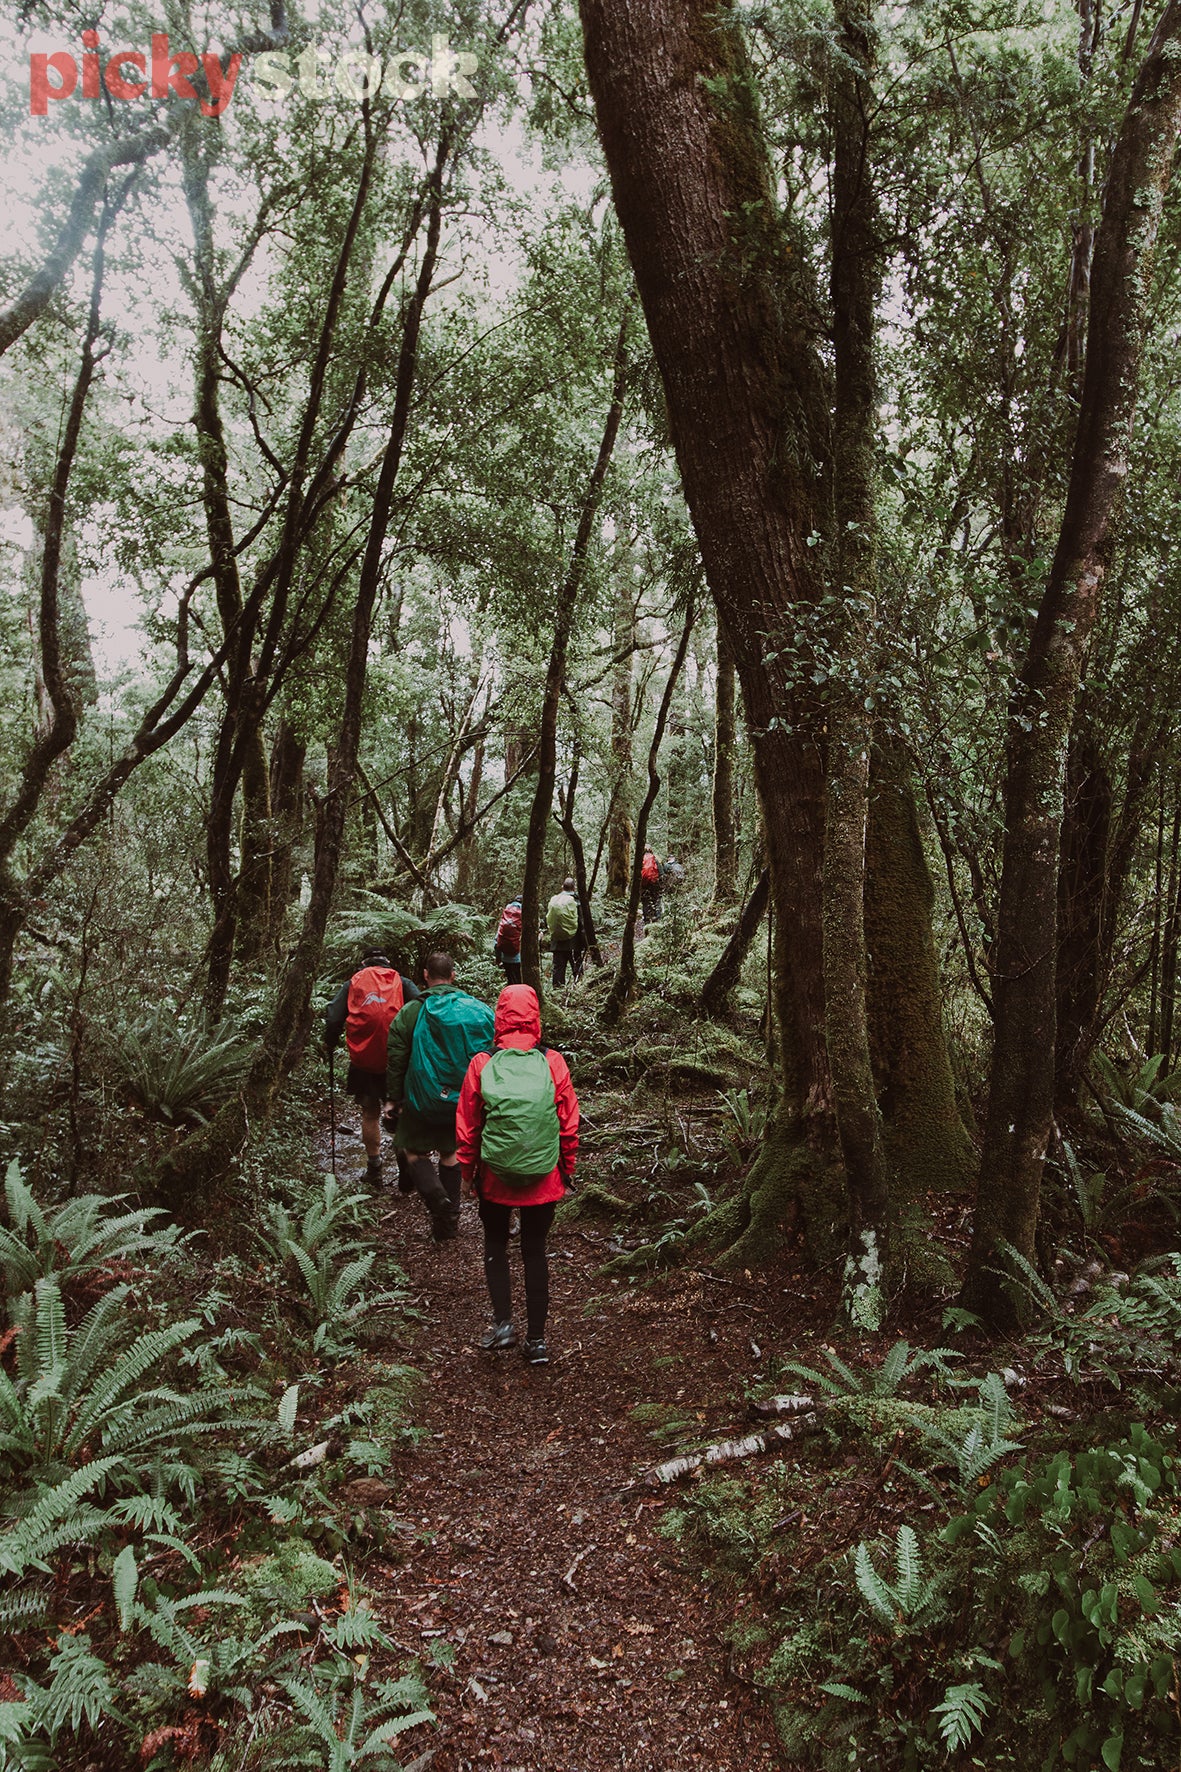 Six hikers trampers walking through new zealand nz forest. Closest walking wearing red jacket, green bag, next walker with green bag cover, red backpack on third walker, other three in far distance. Rainy day, low light, white sky. NZ fern in foreground 